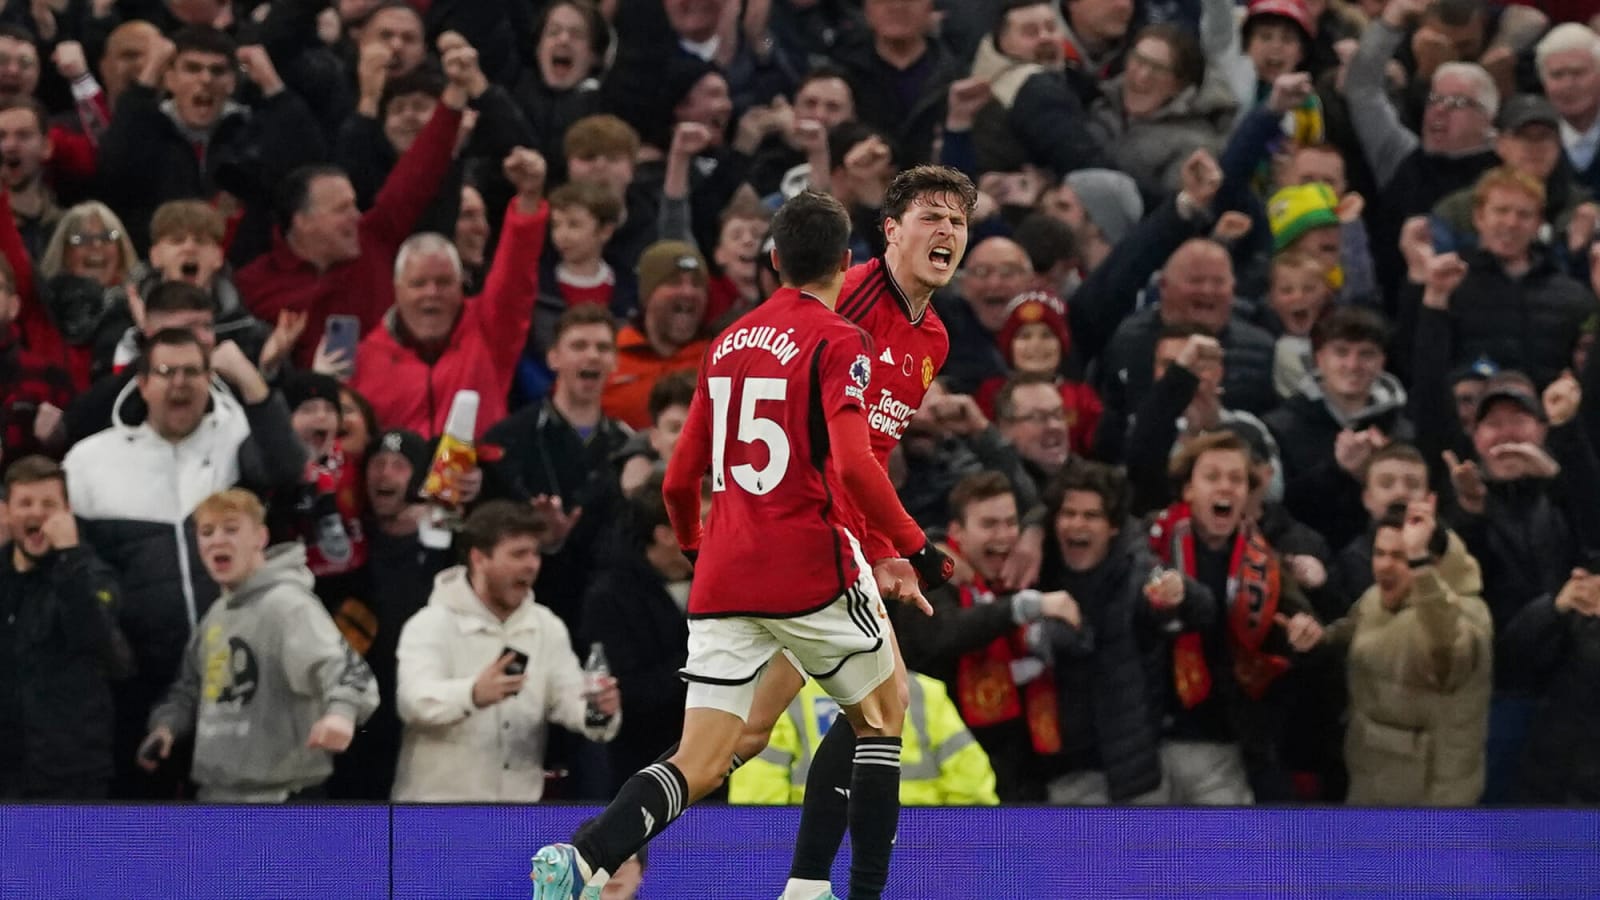 Watch: Victor Lindelof finally breaks the deadlock for Manchester United with a fine finish